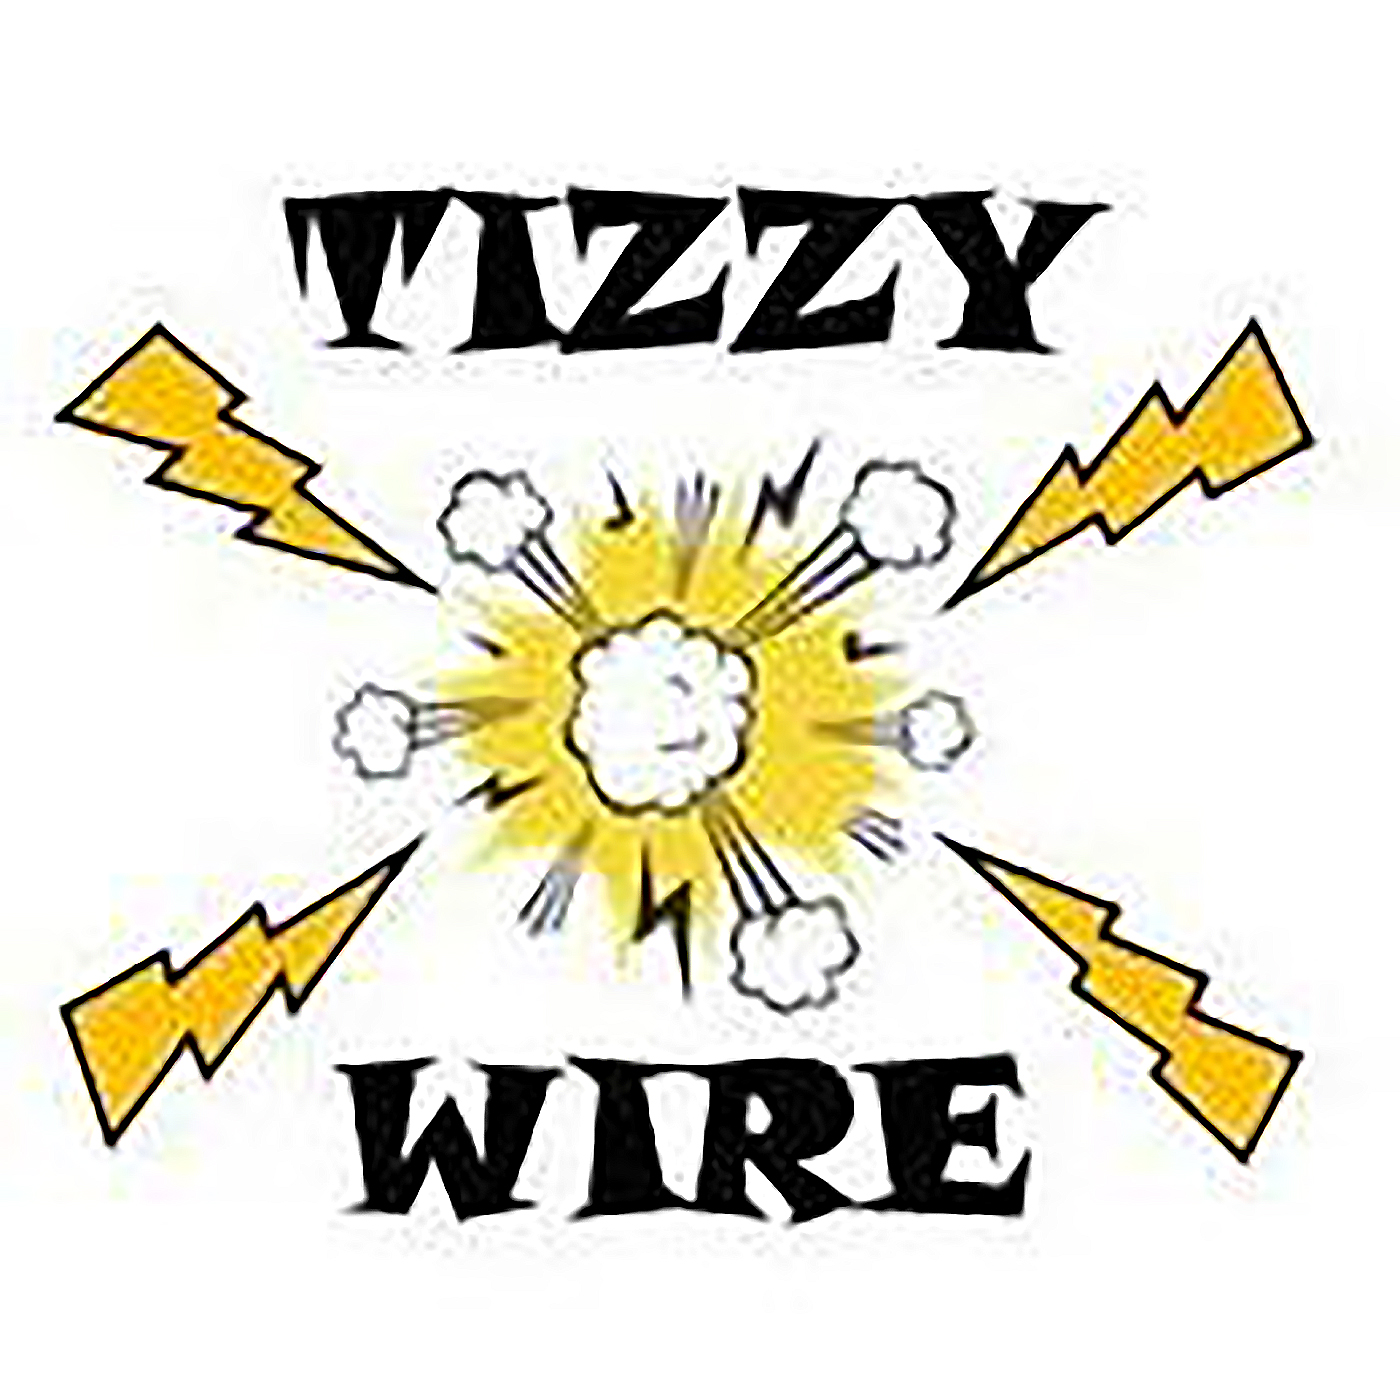 The tizzywire's Podcast